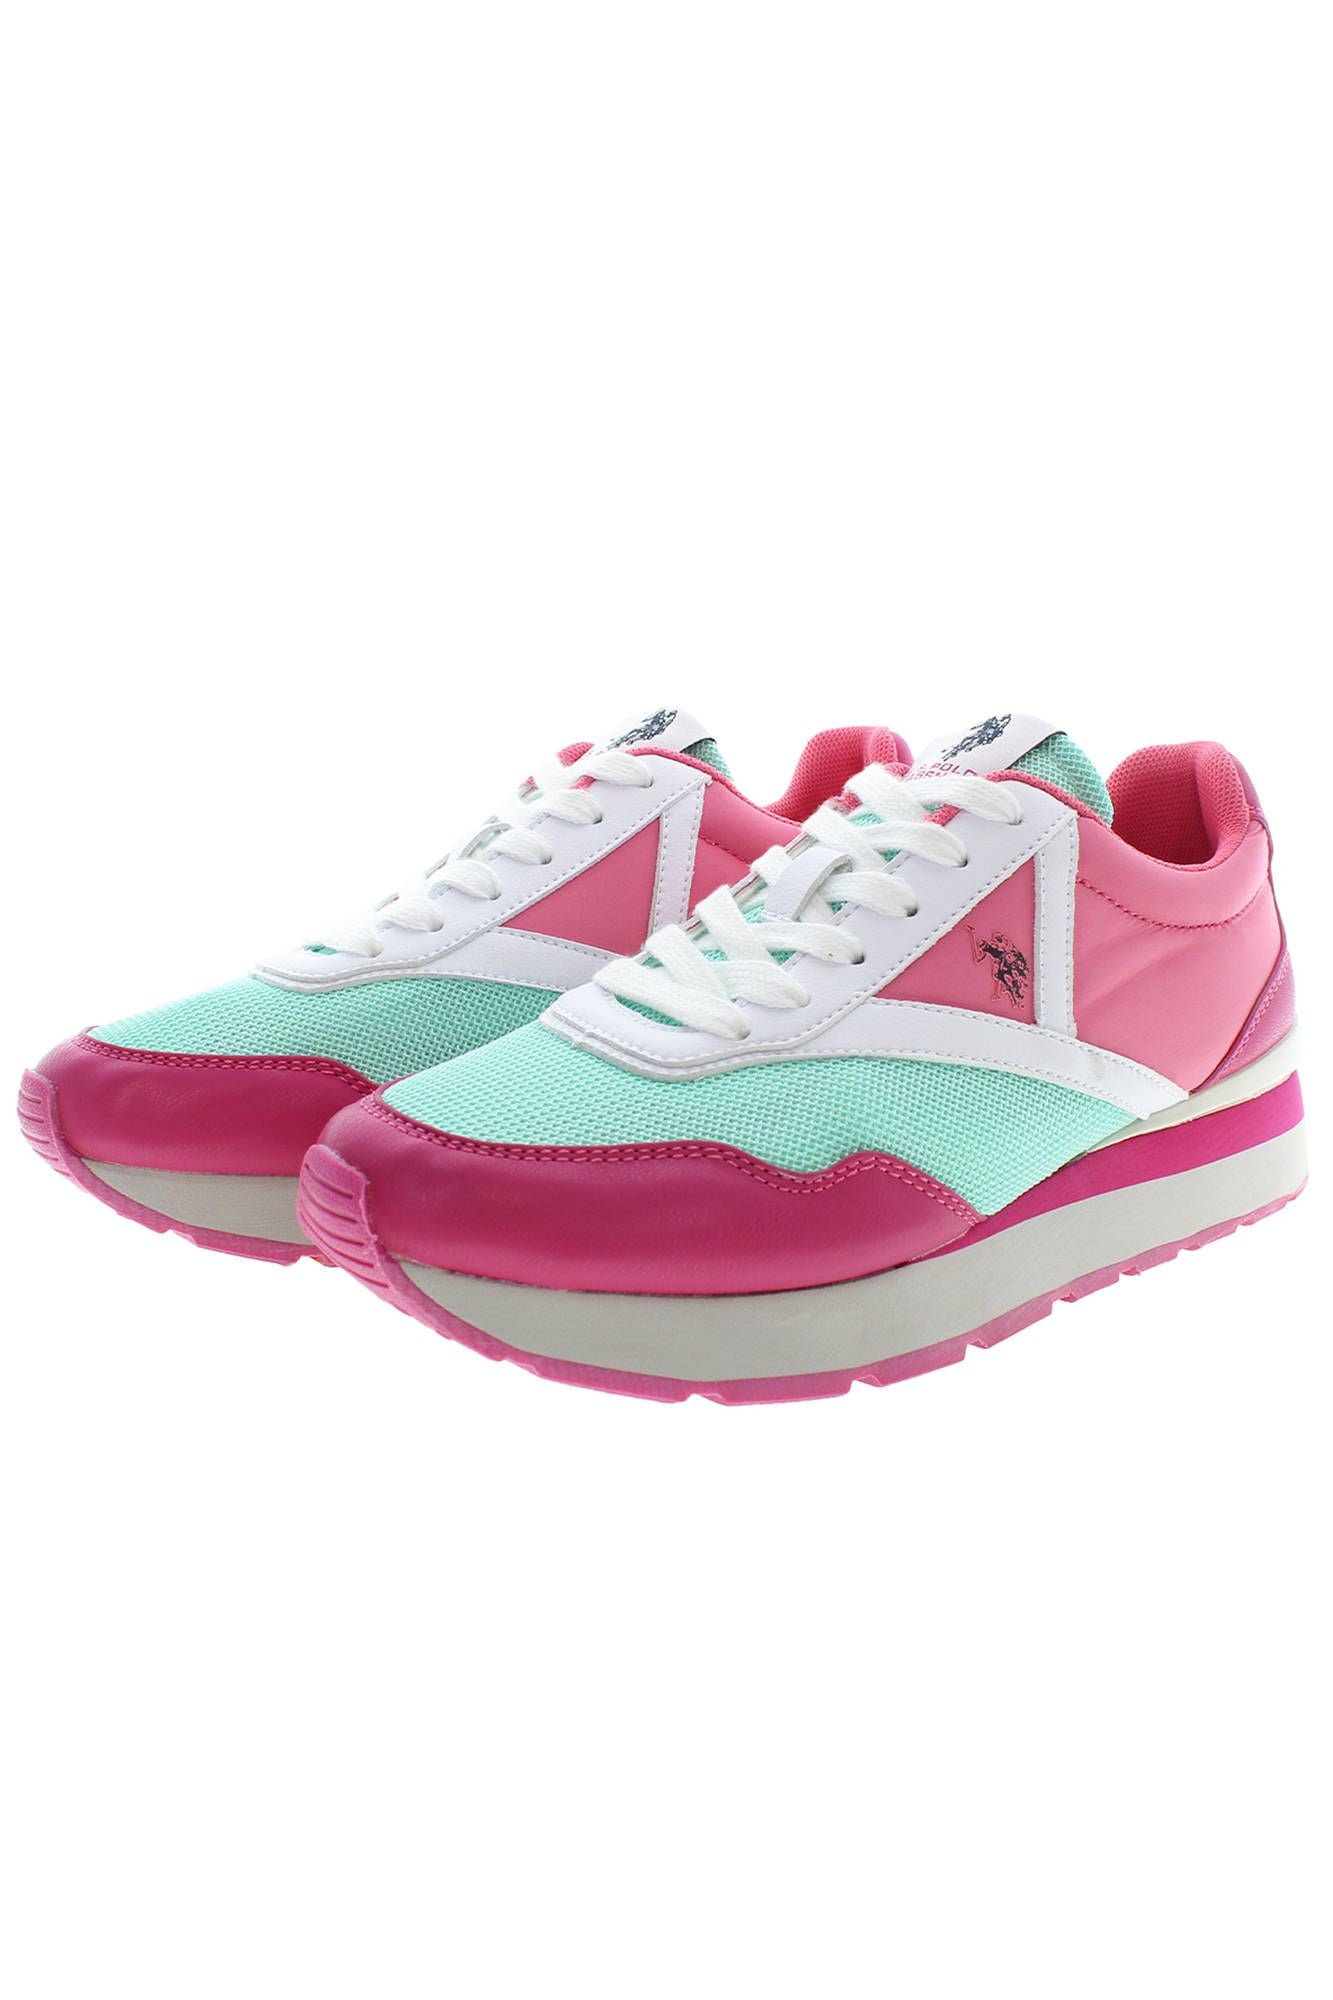 Chic Pink Lace-up Sports Sneakers